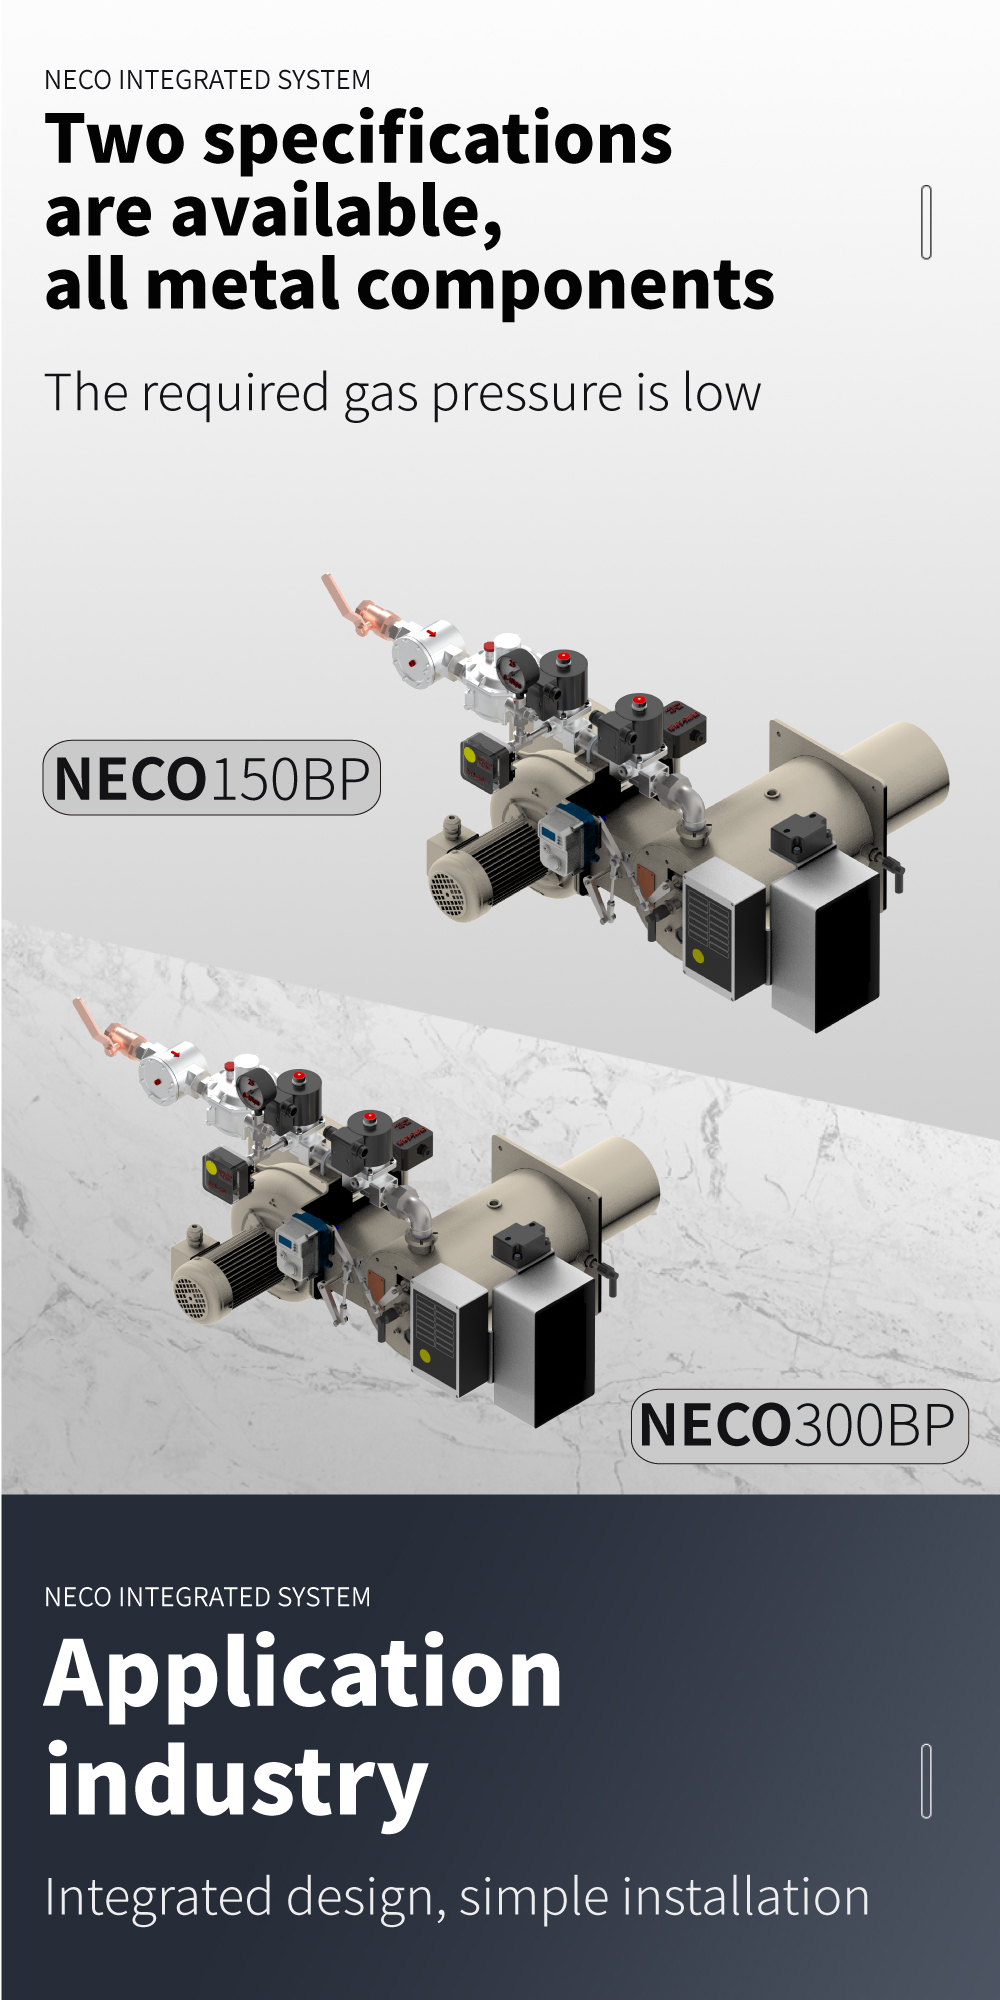 NECO Integrated System